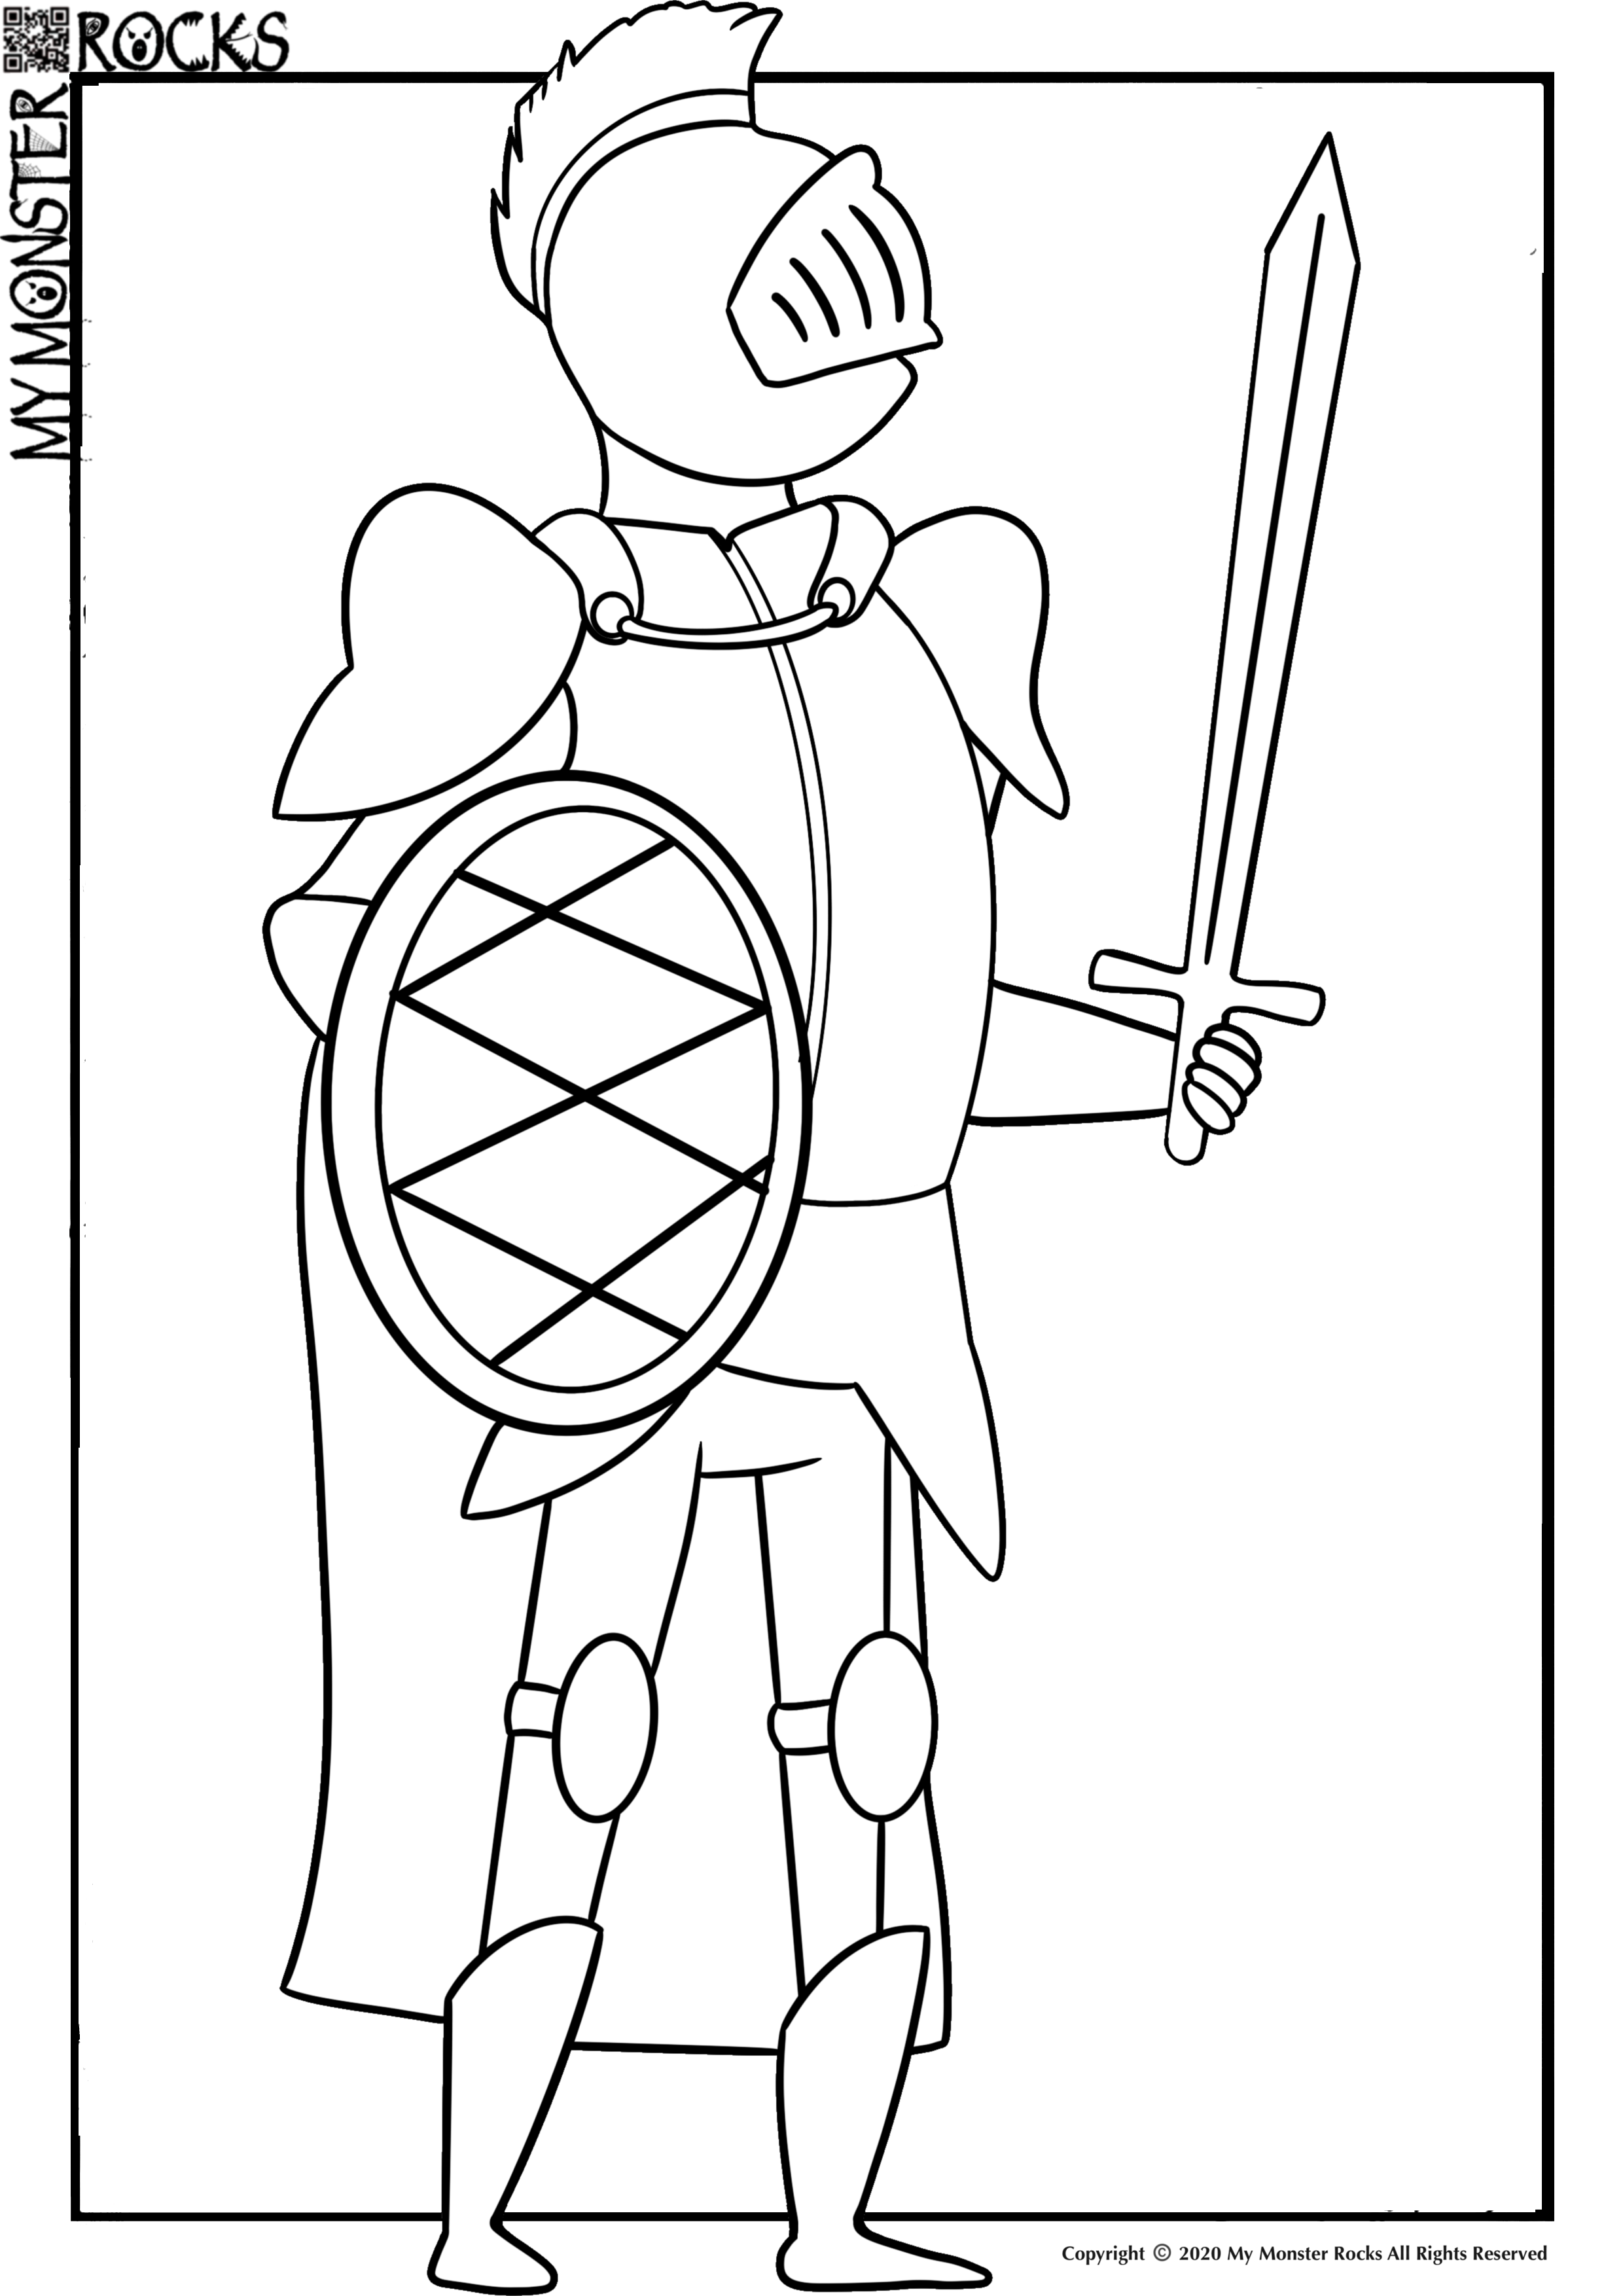 Coloring Pages! - My Monster Rocks!